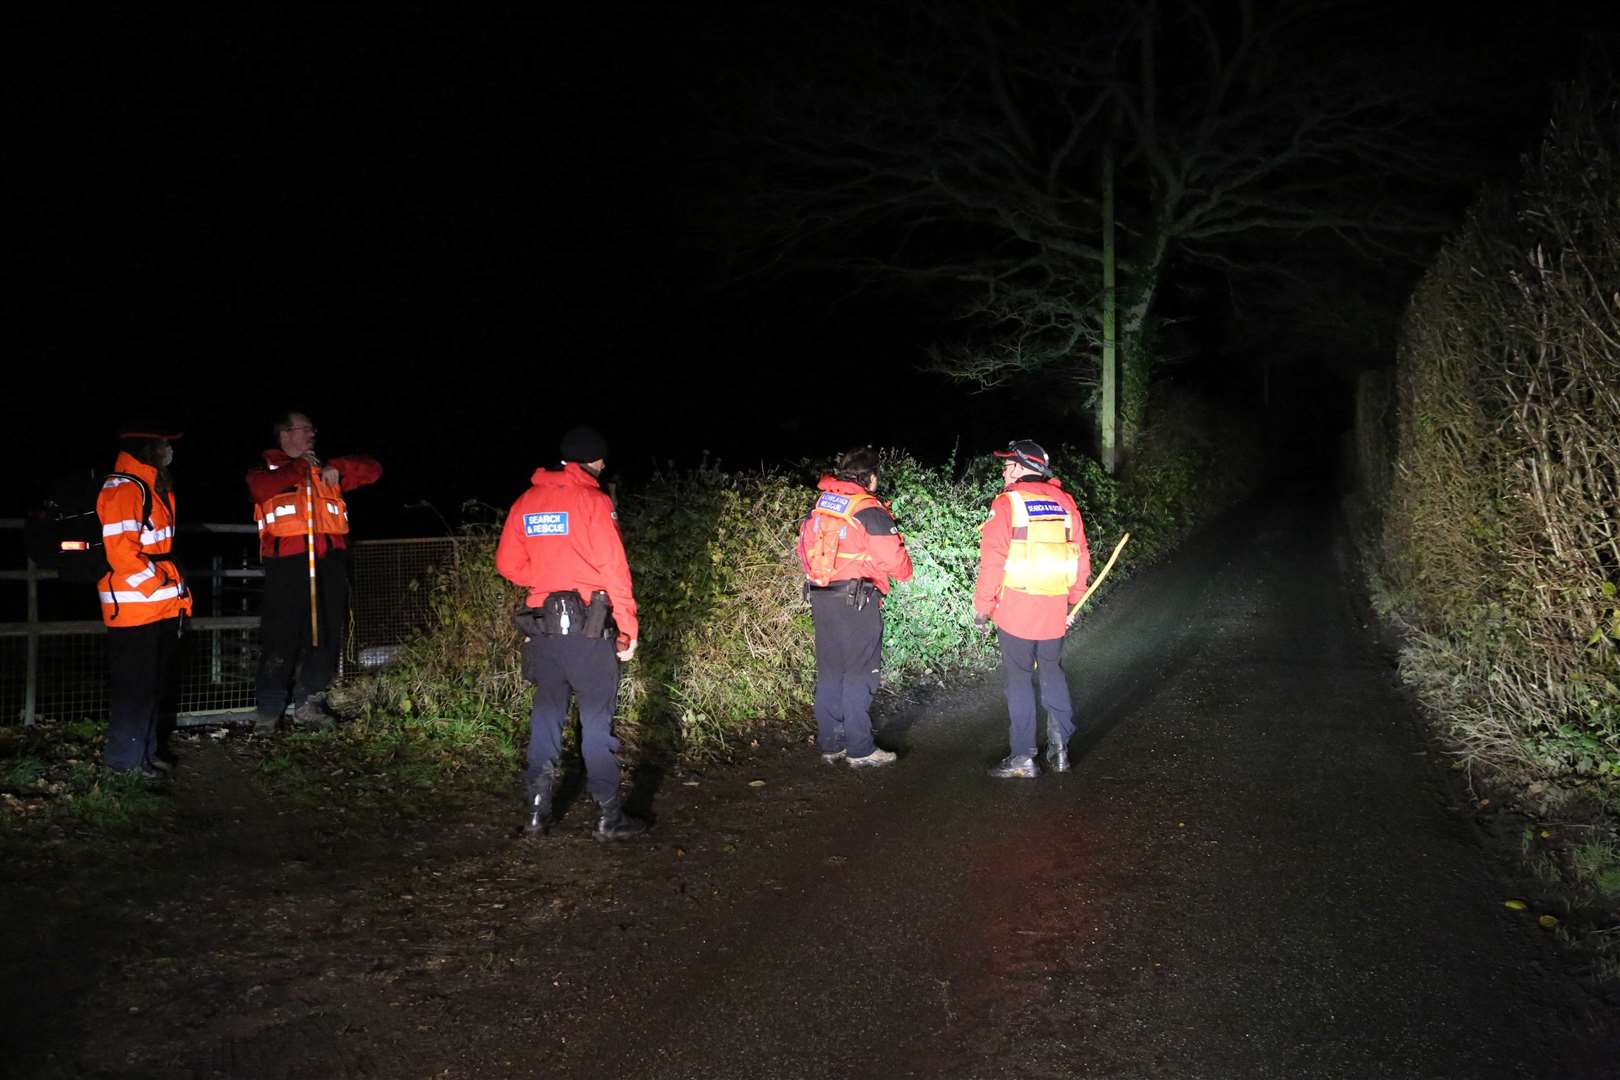 Volunteers scoured the area for Lucas Webb, but the search ended in tragedy